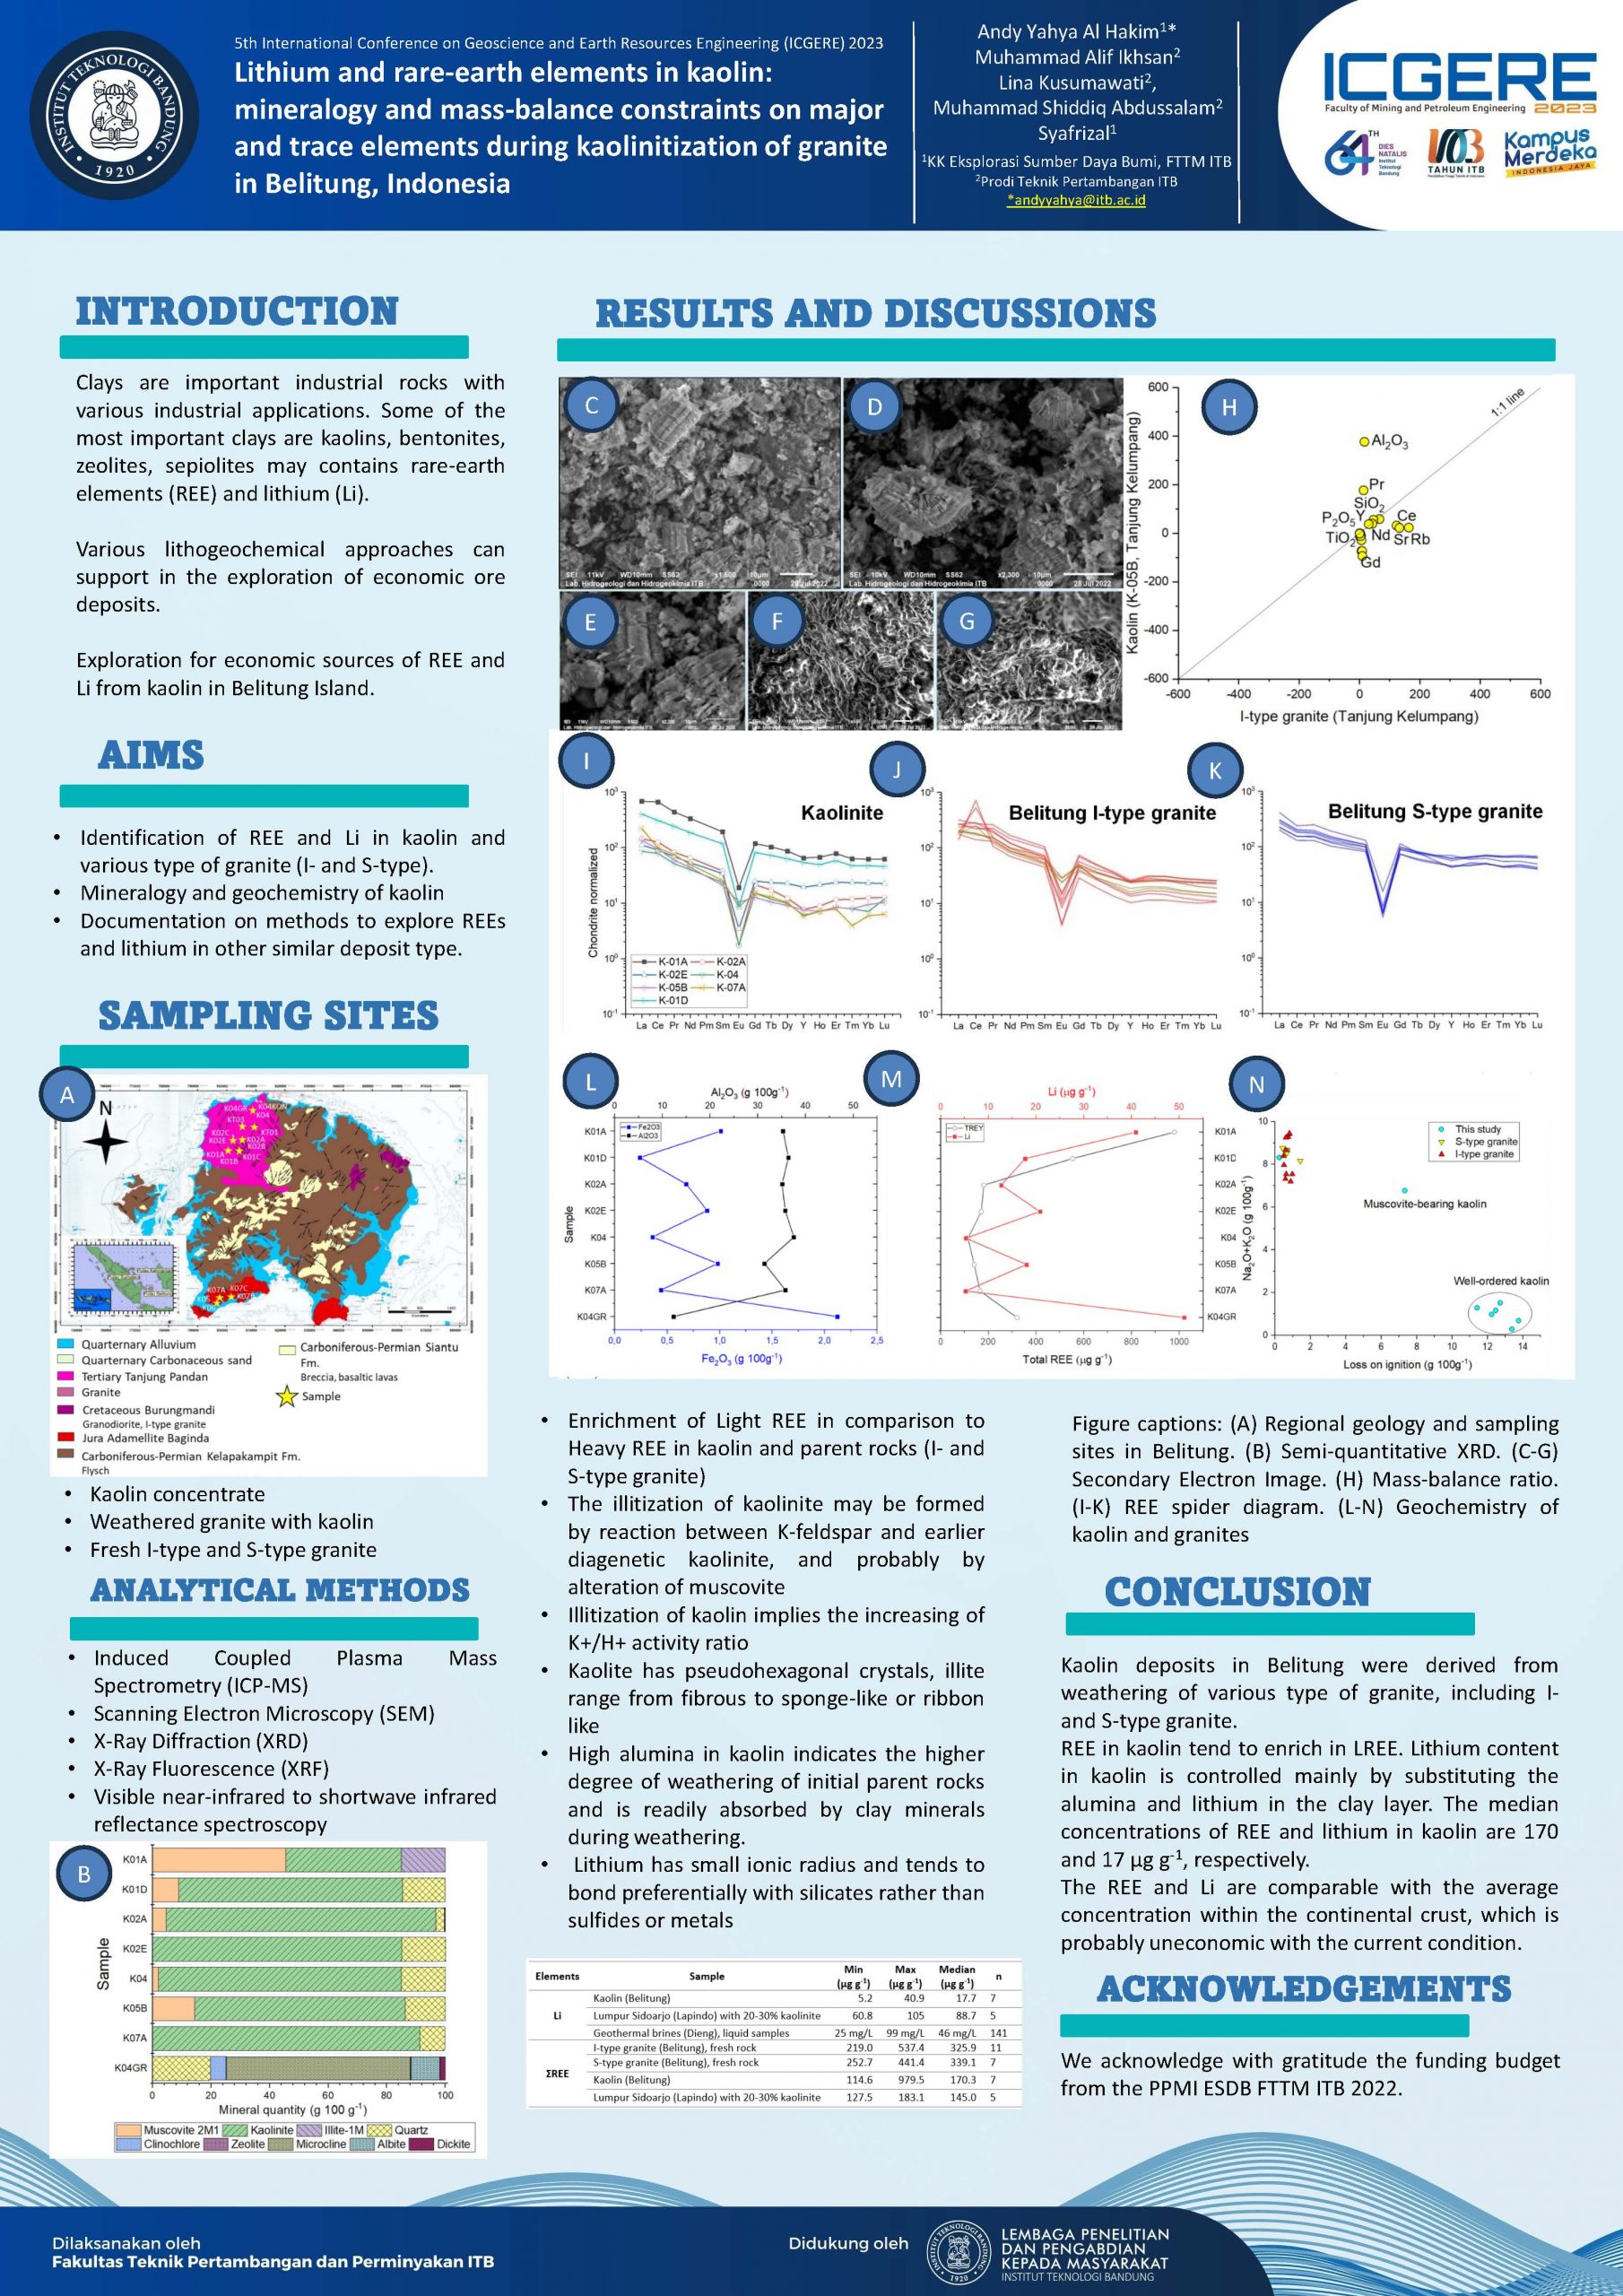 You are currently viewing Lithium and rare-earth elements in kaolin: mineralogy and mass-balance constraints on major and trace elements during kaolinitization of granite in Belitung, Indonesia